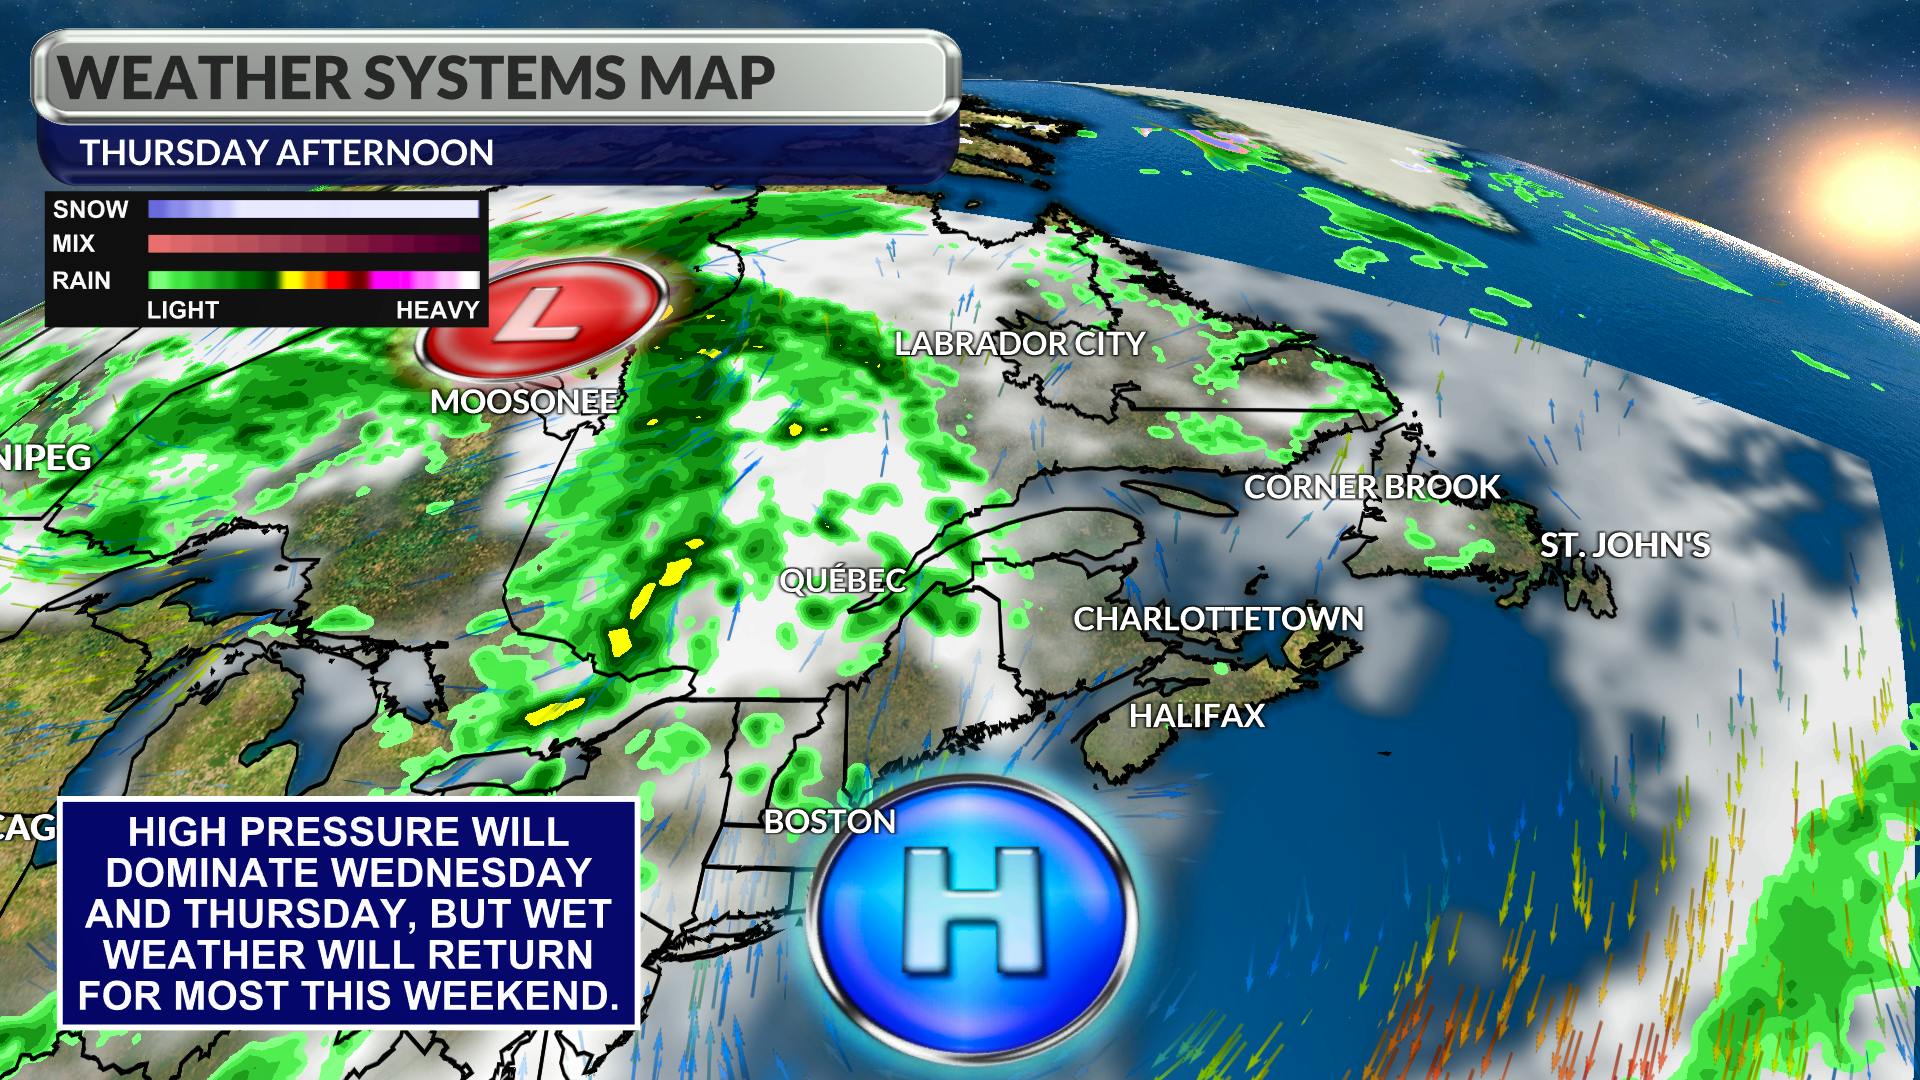 High-pressure will bring sunshine Wednesday and Thursday before more wet weather this weekend.